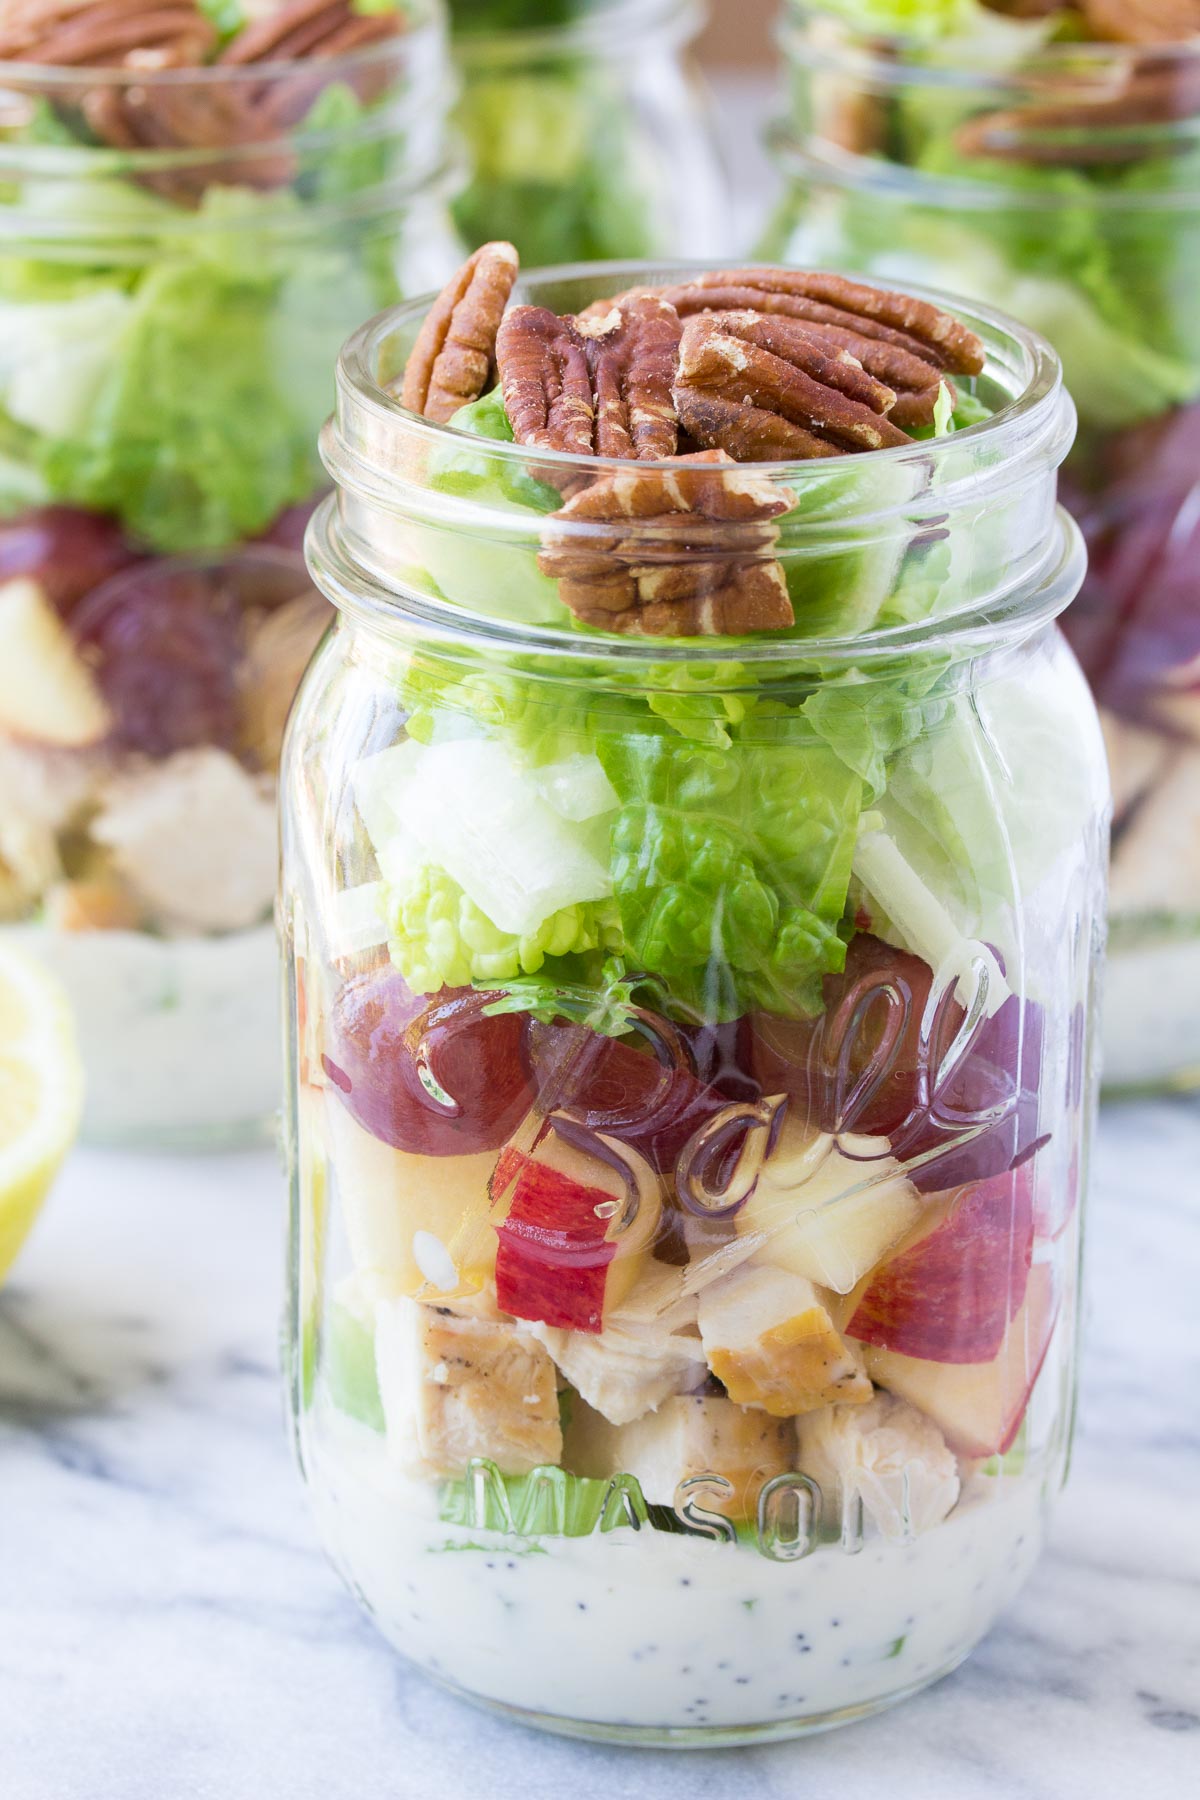 salad in a jar ready to east